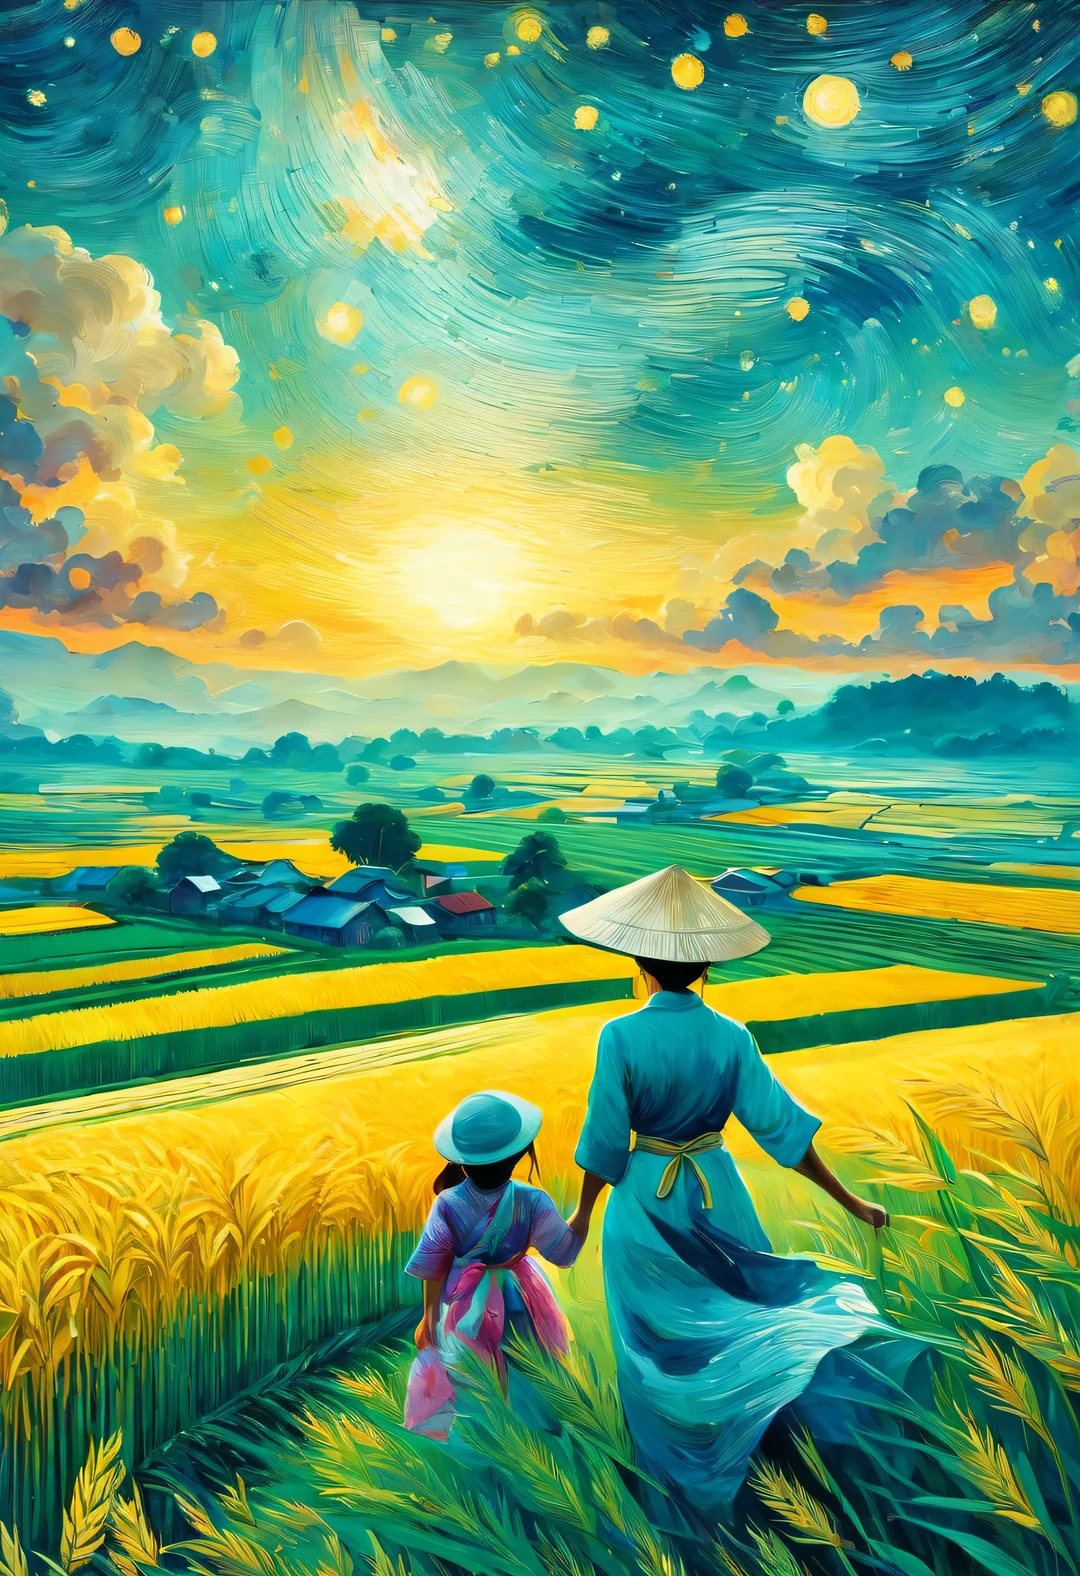 best quality, 8k, High quality, masterpiece: 1.2, Super fine, realism: 1.37, double exposure,
(Endless rice fields and a little girl), blue sky, dreamy atmosphere, bright color palette, Vibrant shades, Impressionist brushstrokes, Subtle lighting effects, sunset on the horizon, Harmony between nature and sky, textured brushstrokes, Abundant and vibrant crops, dusk atmosphere, Tranquil pastoral scenery, Shining stars light up the night, create tranquility、Picturesque setting, Inspired by the style and techniques of Van Gogh. Sublime and atmospheric depiction, ethereal beauty, Fascinating celestial phenomenon,